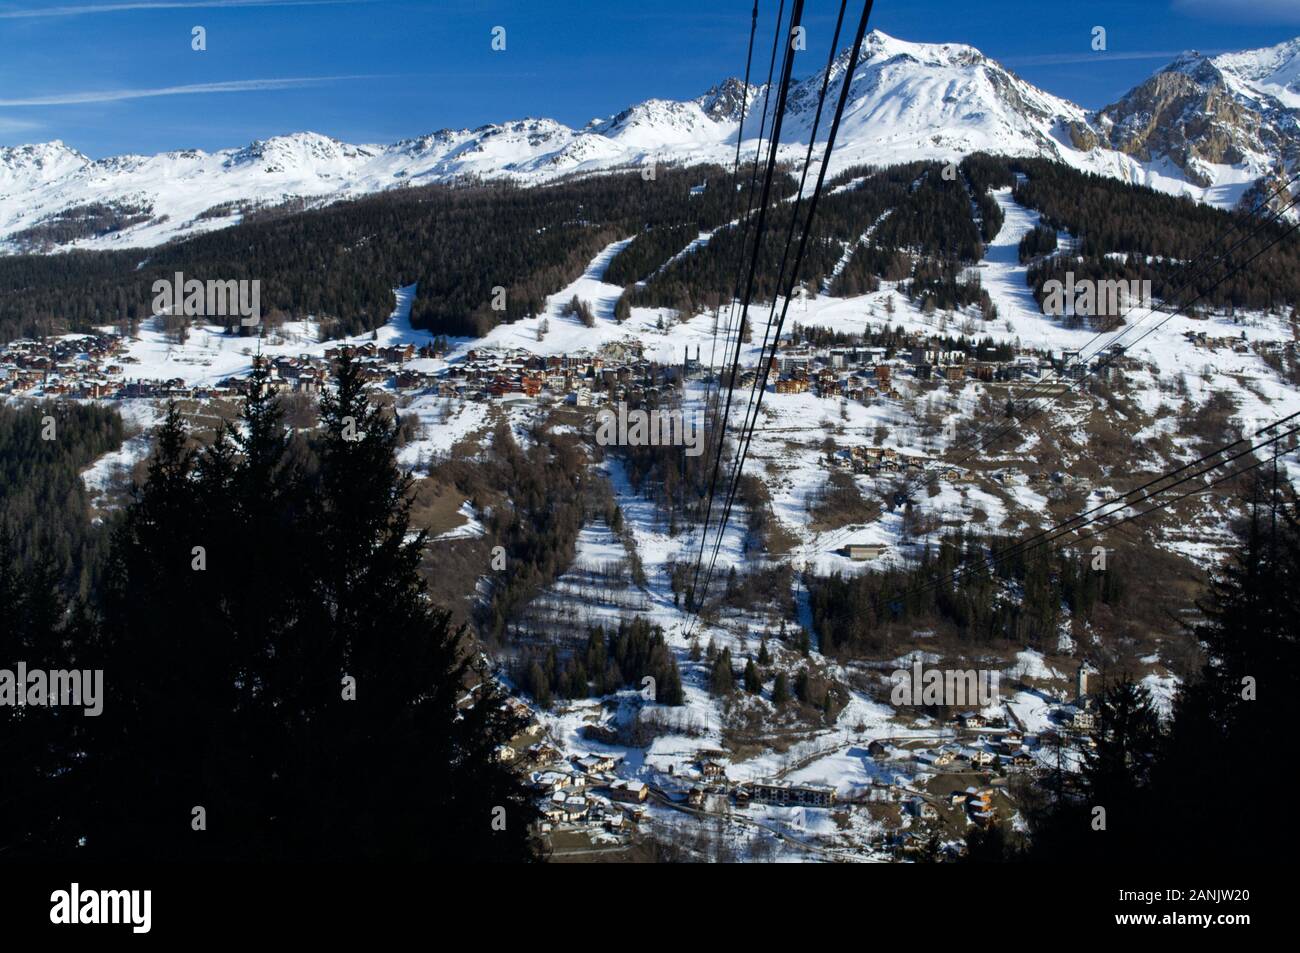 View across towards Peisey Vallandry in Les Arcs from the Vanoise Express cable car at the La Plagne station. Stock Photo